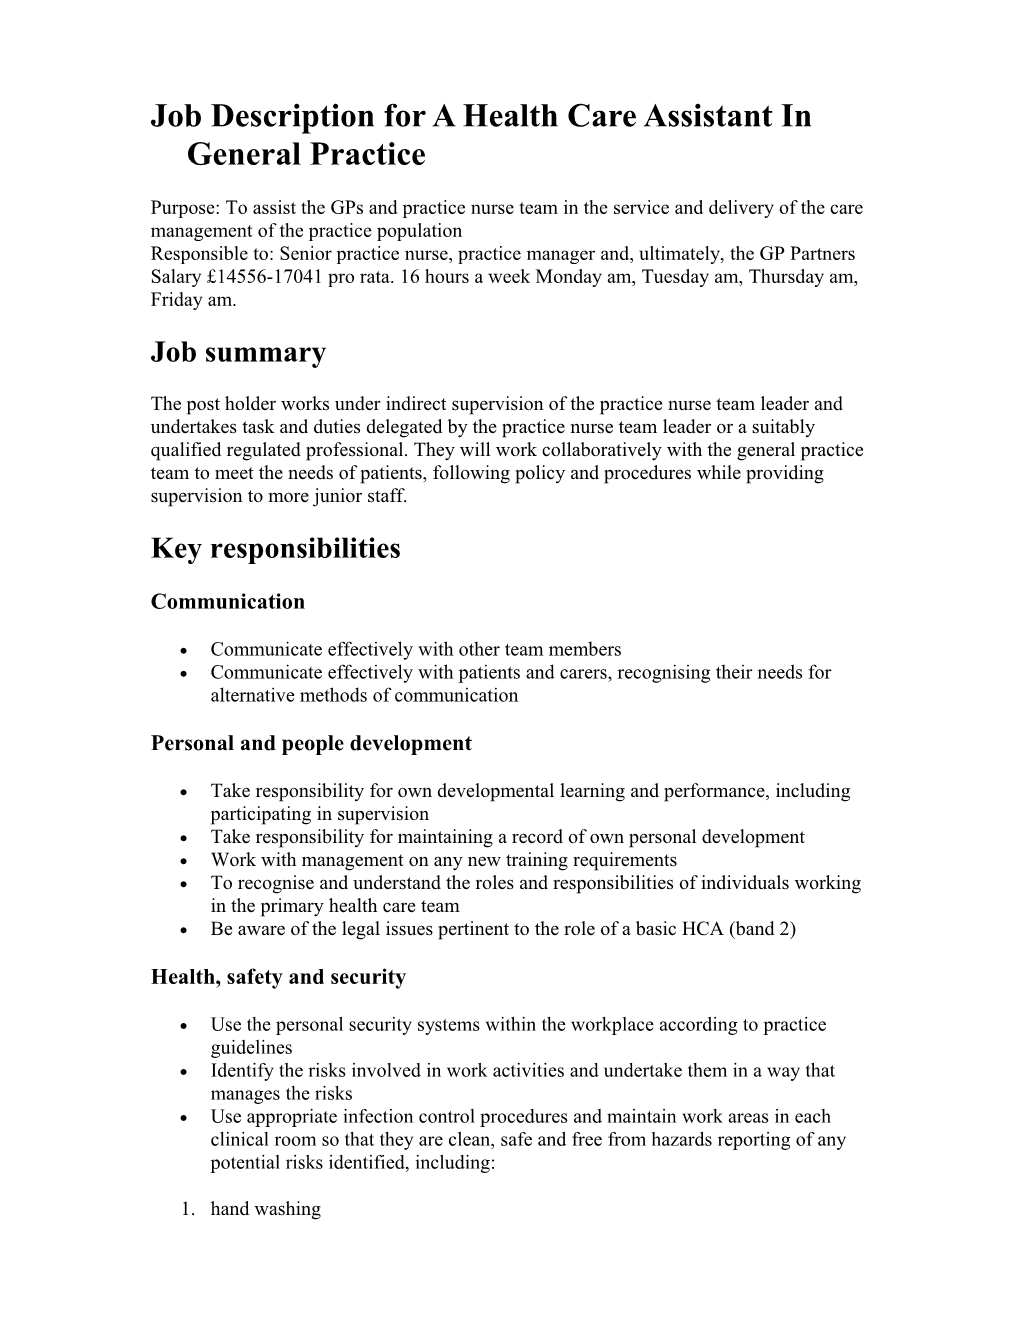 Level 2 - Job Description for a Health Care Assistant in General Practice s1